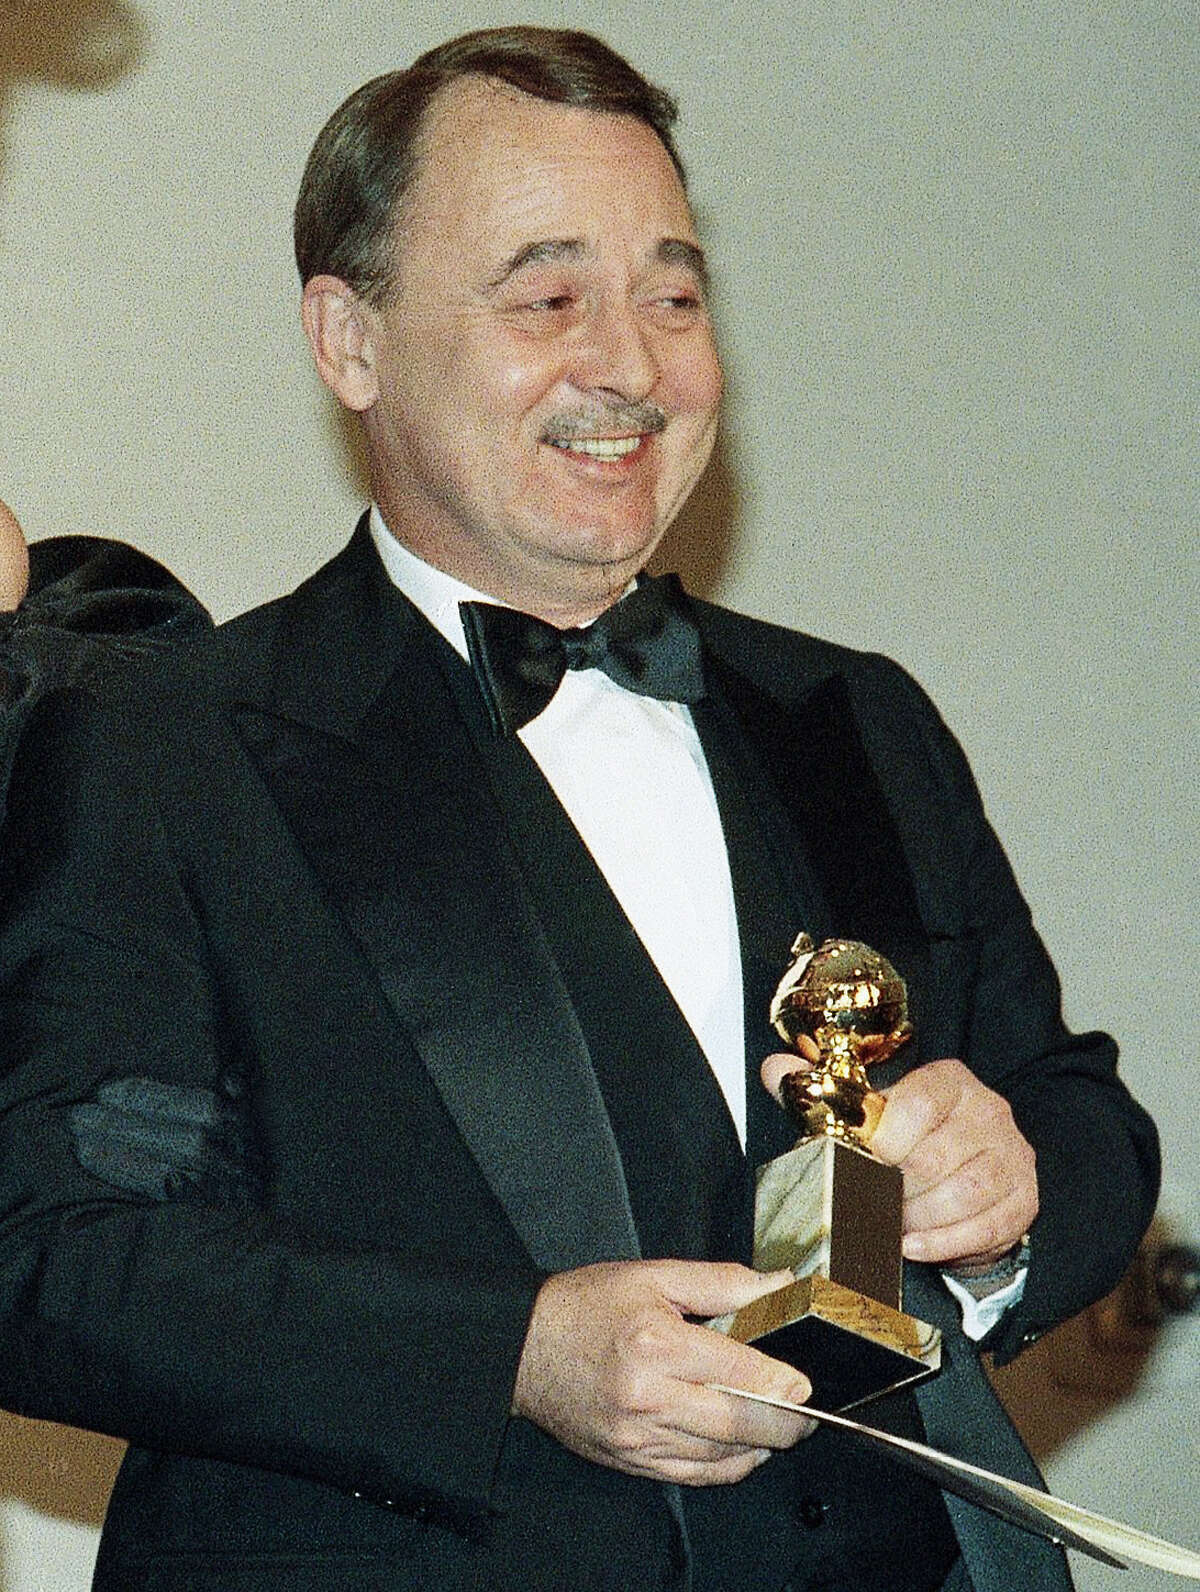 John Hillerman: Actor best known as Higgins on "Magnum, P.I.," the role for which he won a Golden Globe in 1982 and an Emmy in 1987.